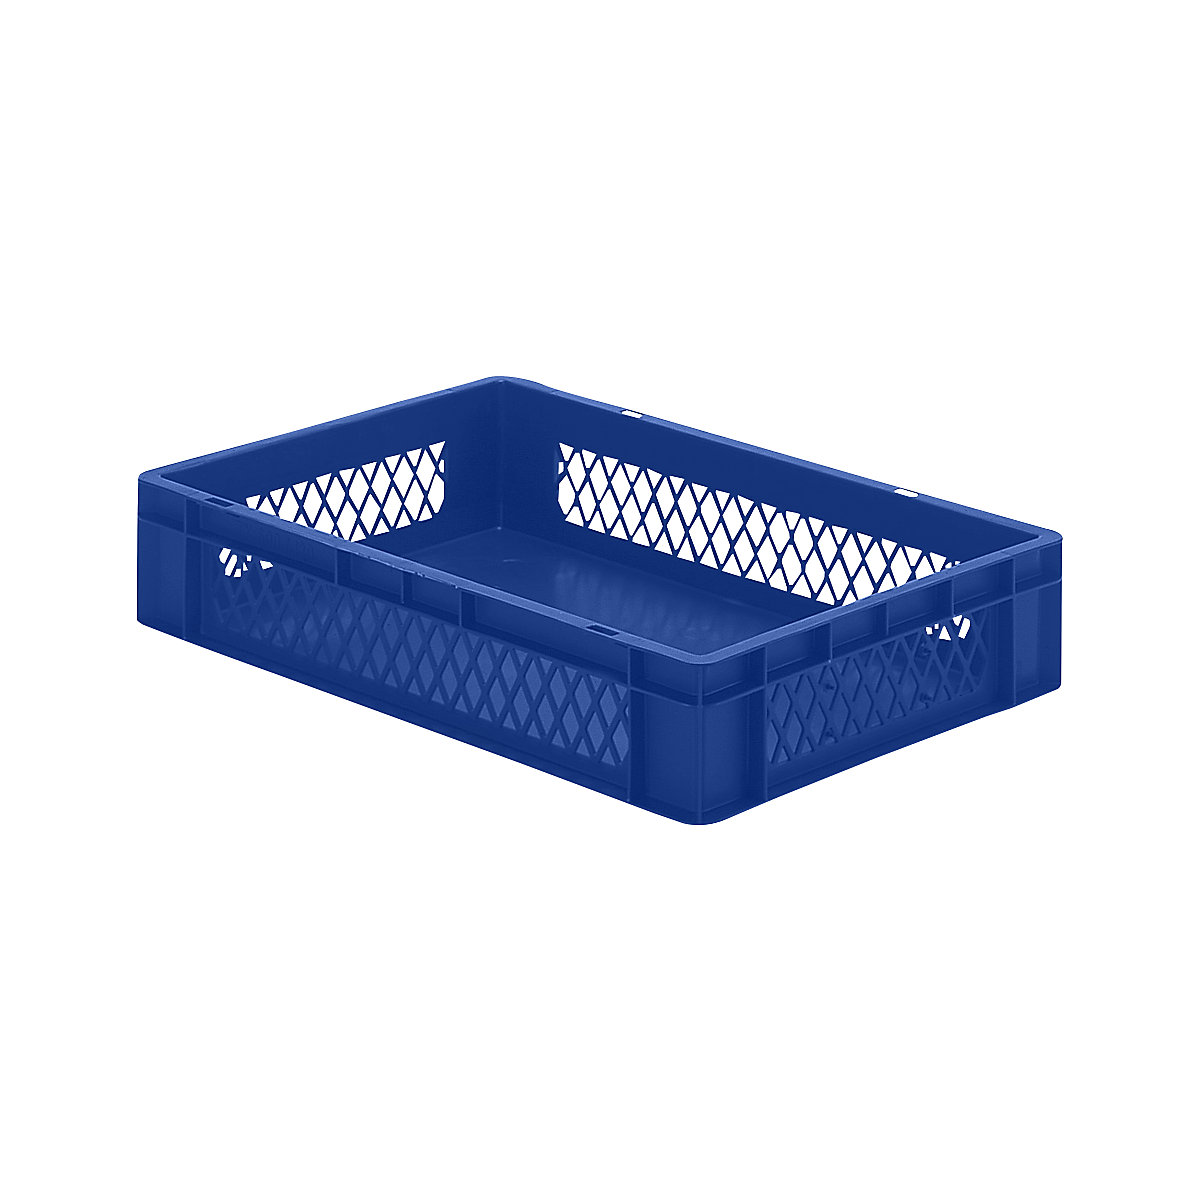 Euro stacking container, perforated walls, closed base, LxWxH 600 x 400 x 120 mm, blue, pack of 5